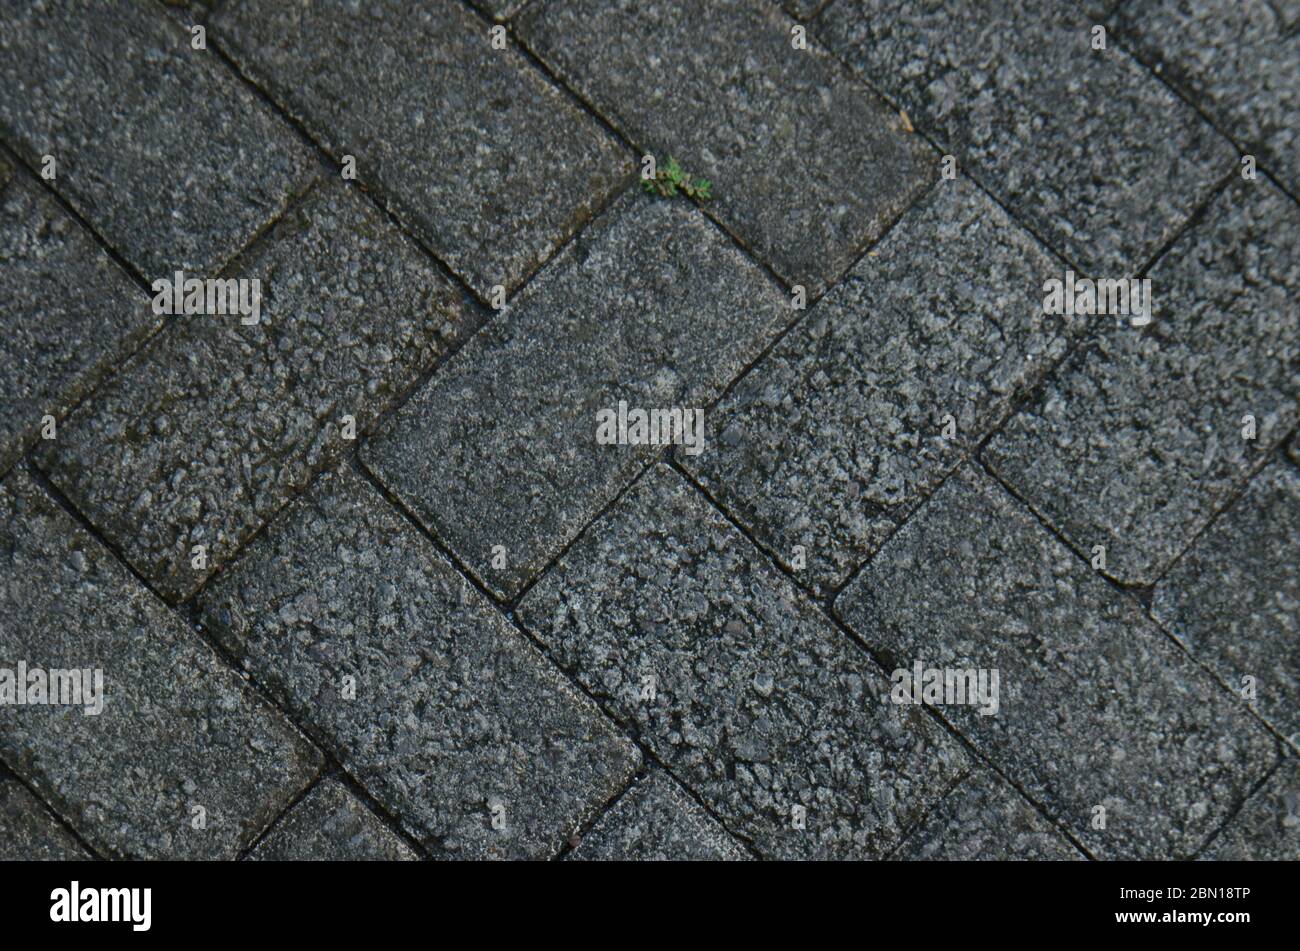 Paving stone texture. texture of the paved tile on the bottom of the street. Stock Photo